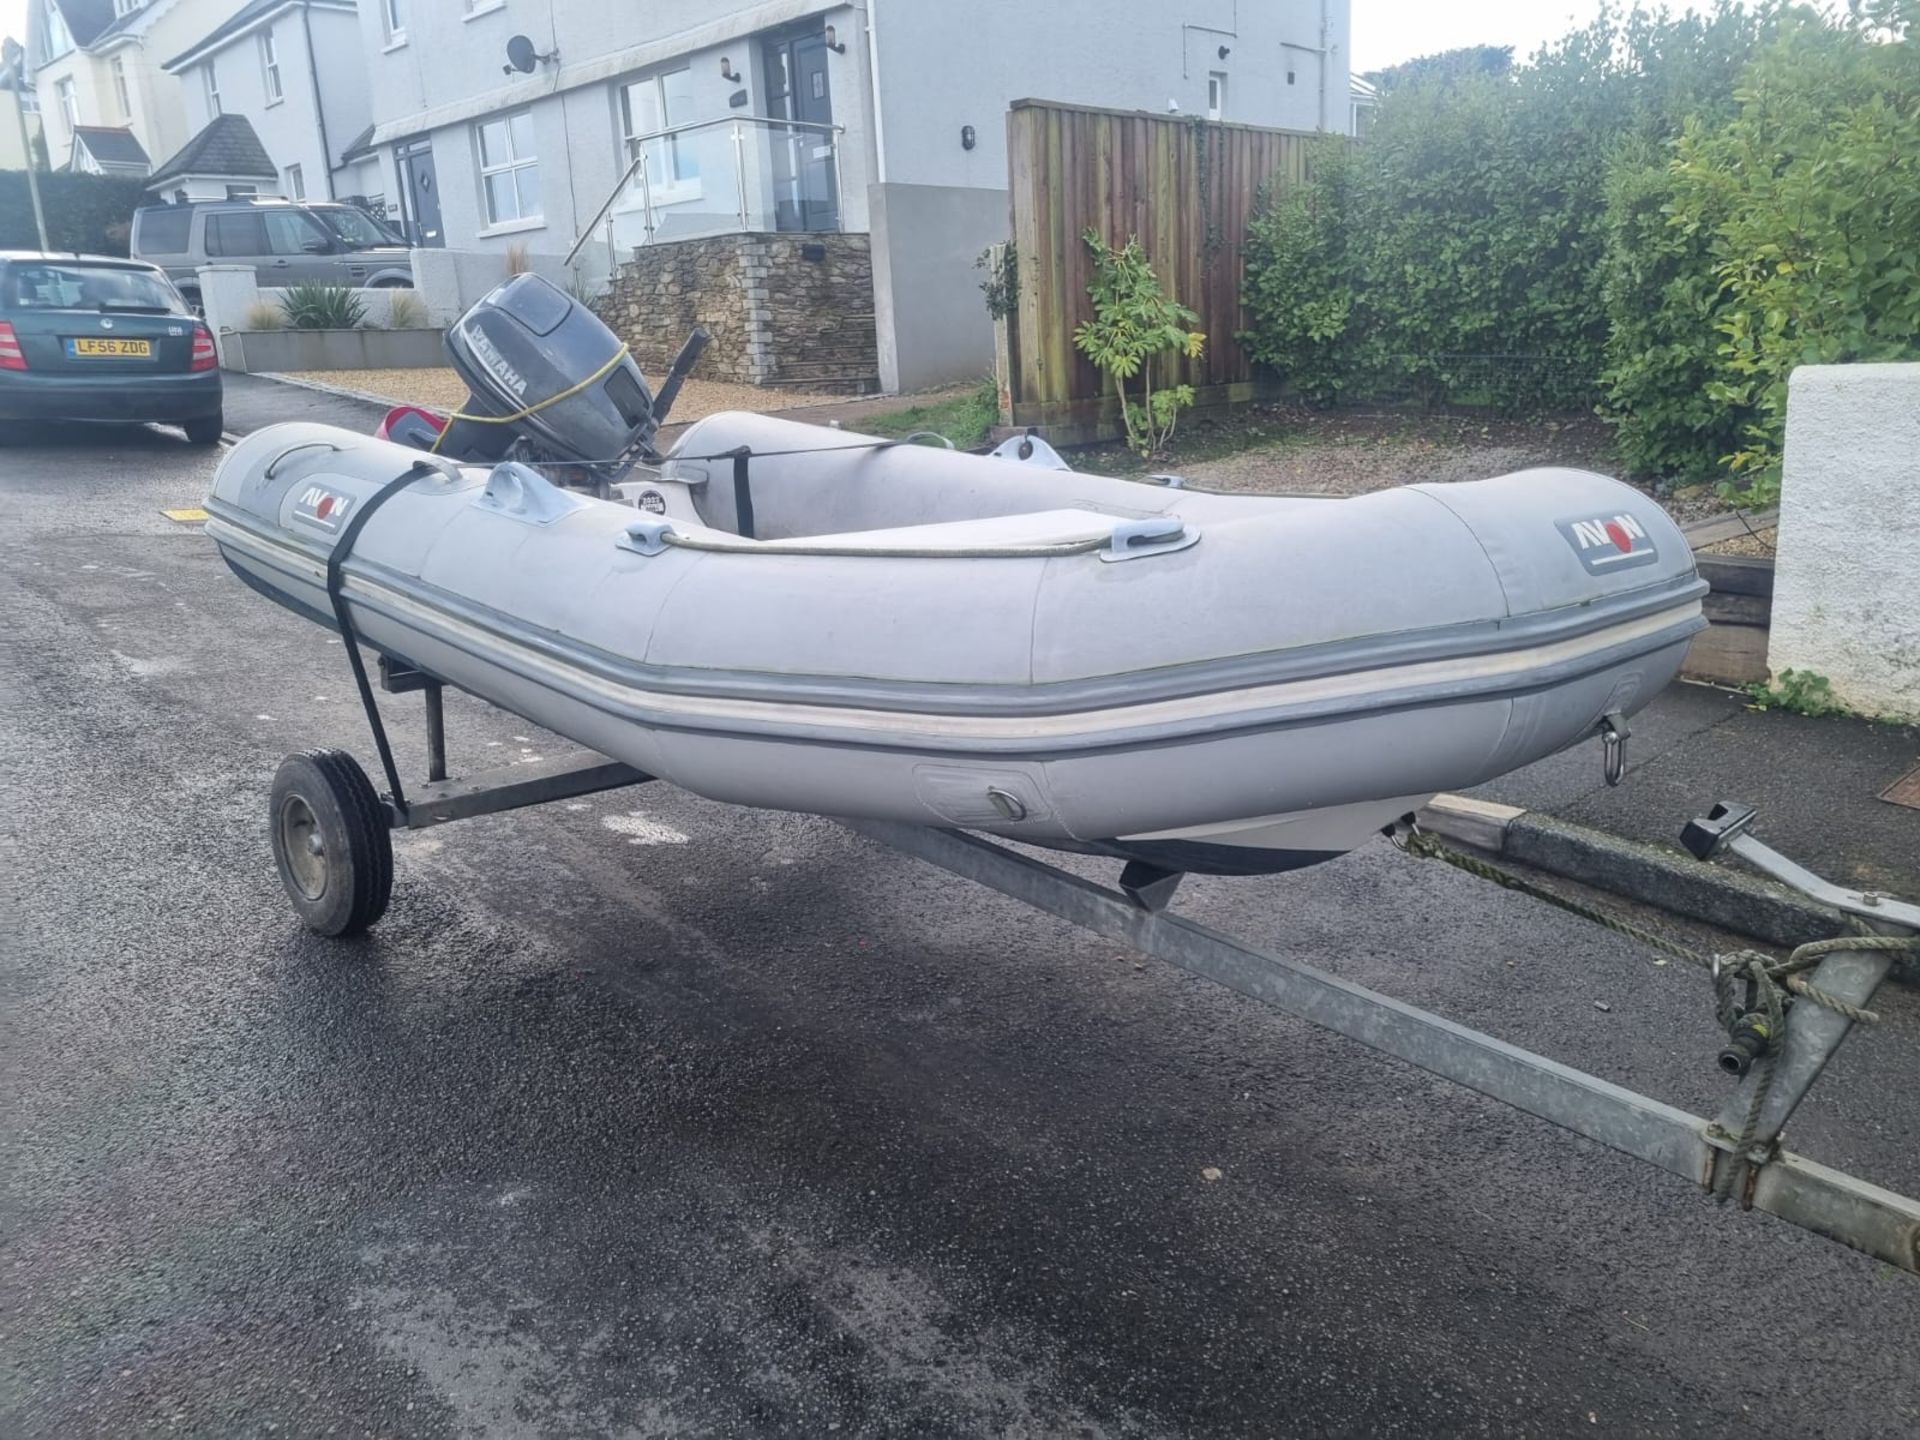 2002 Avon rigid inflatable boat with Yamaha 15HP two stroke engine.